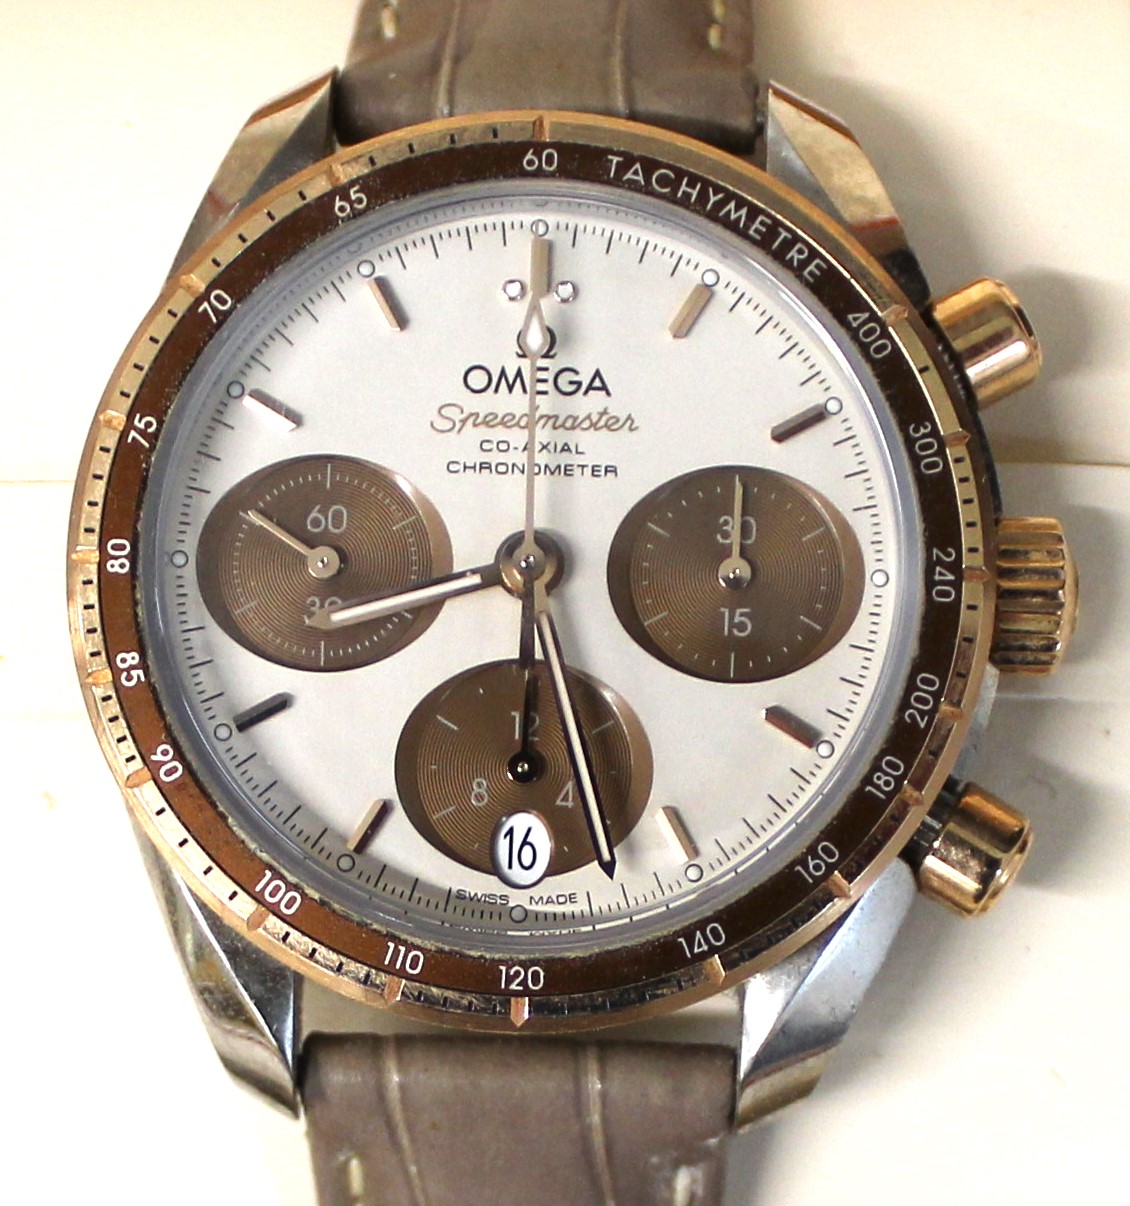 Gents Omega Speedmaster stainless steel wristwatch on leather strap, Reference no. 32423385002002,